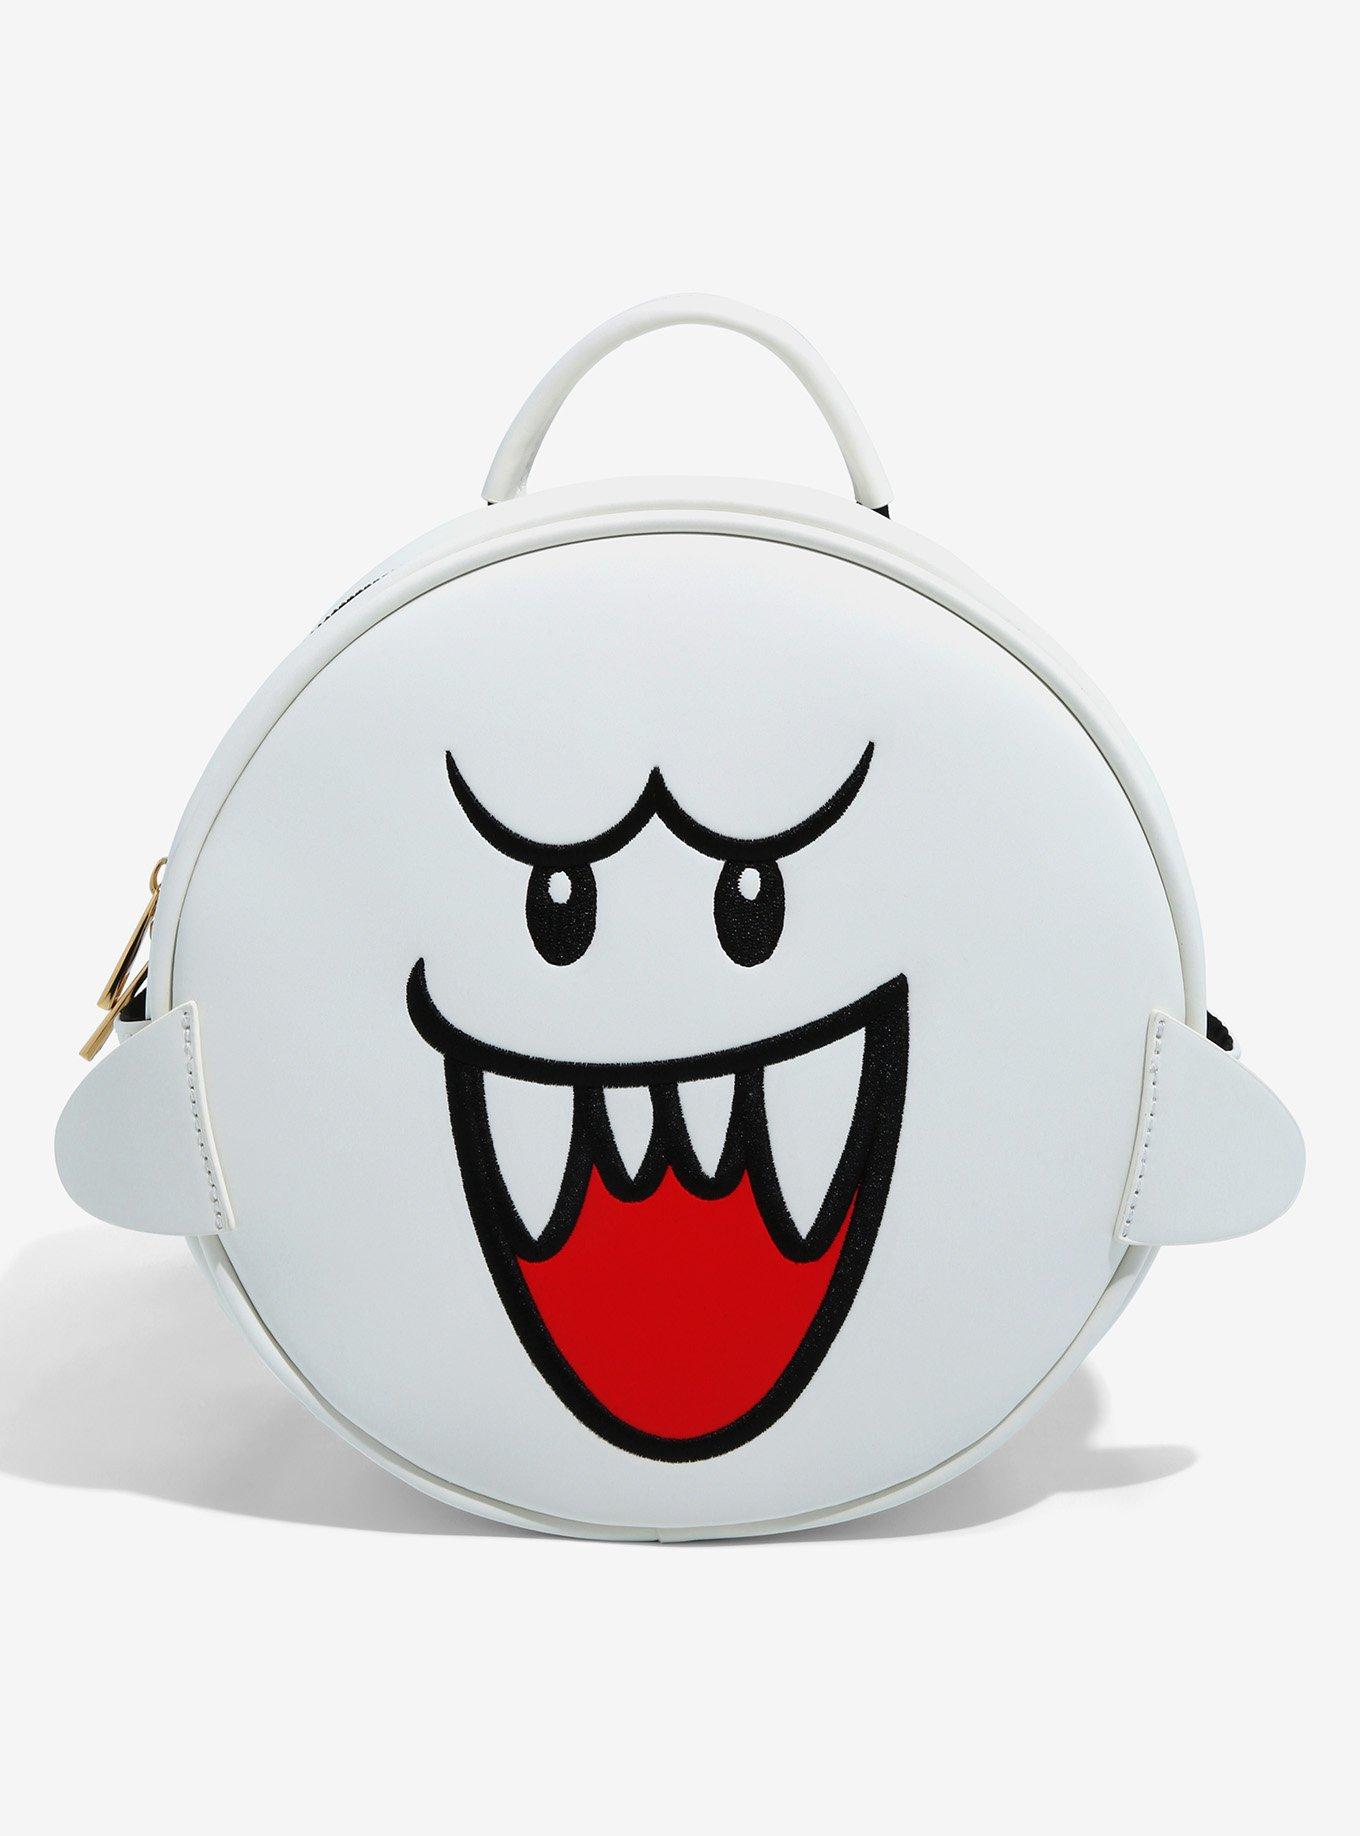 Super Mario and Friends Lunch Bag Backpack